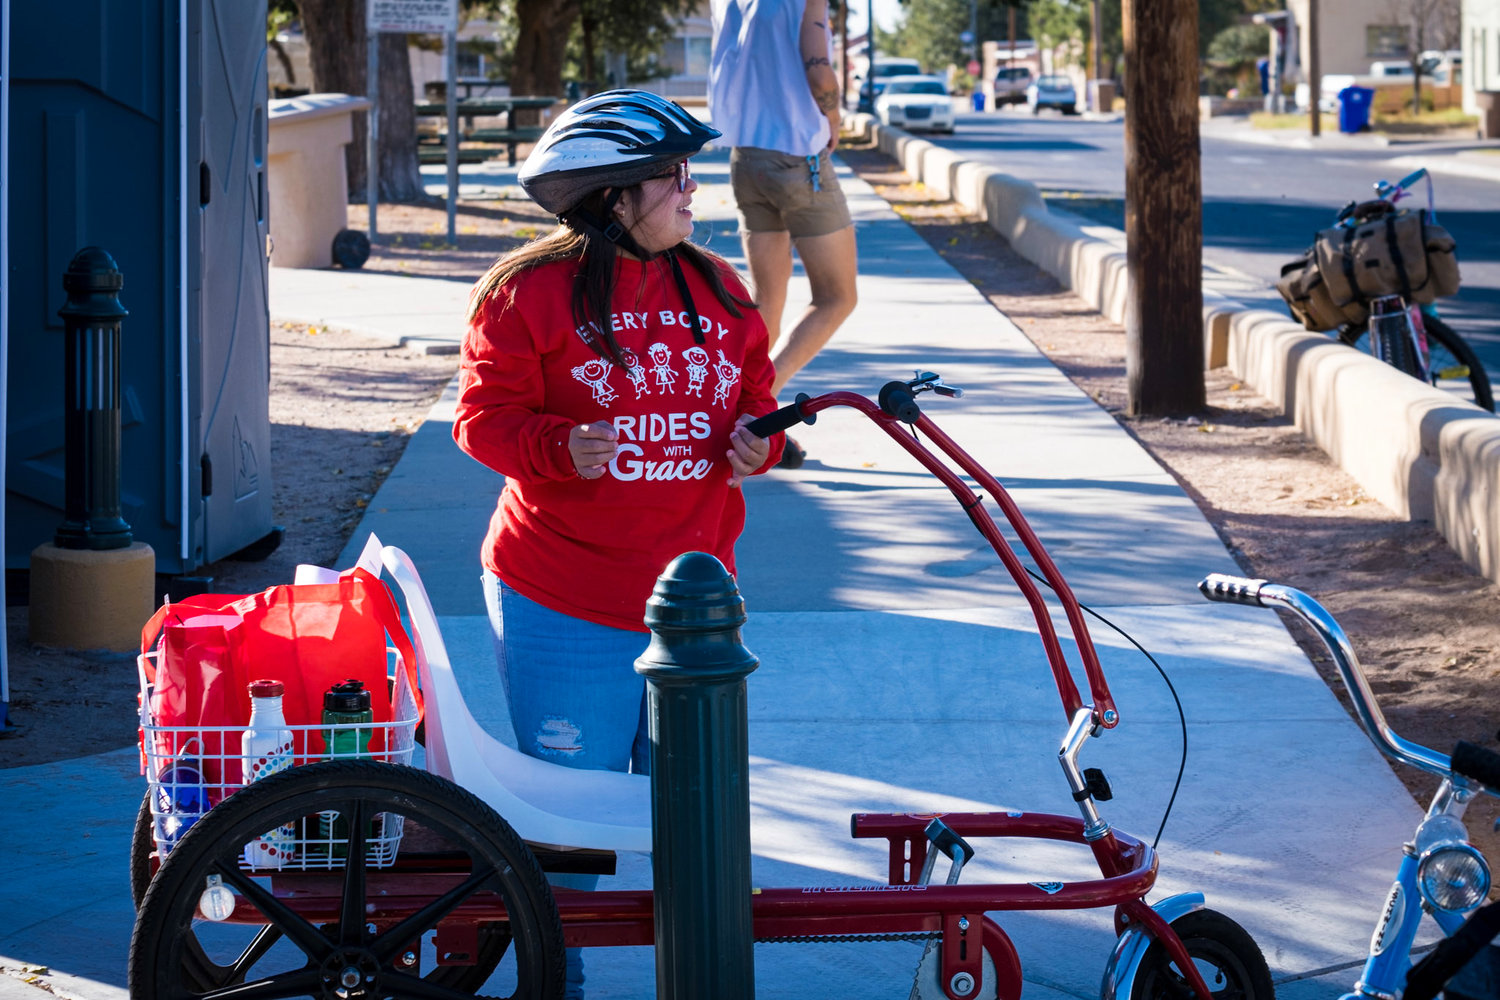 Grace Holguin and her adaptive cycle at the October 2021 New Mexico Bikepacking Summit, where she led the Dangerbird Grand Depart.